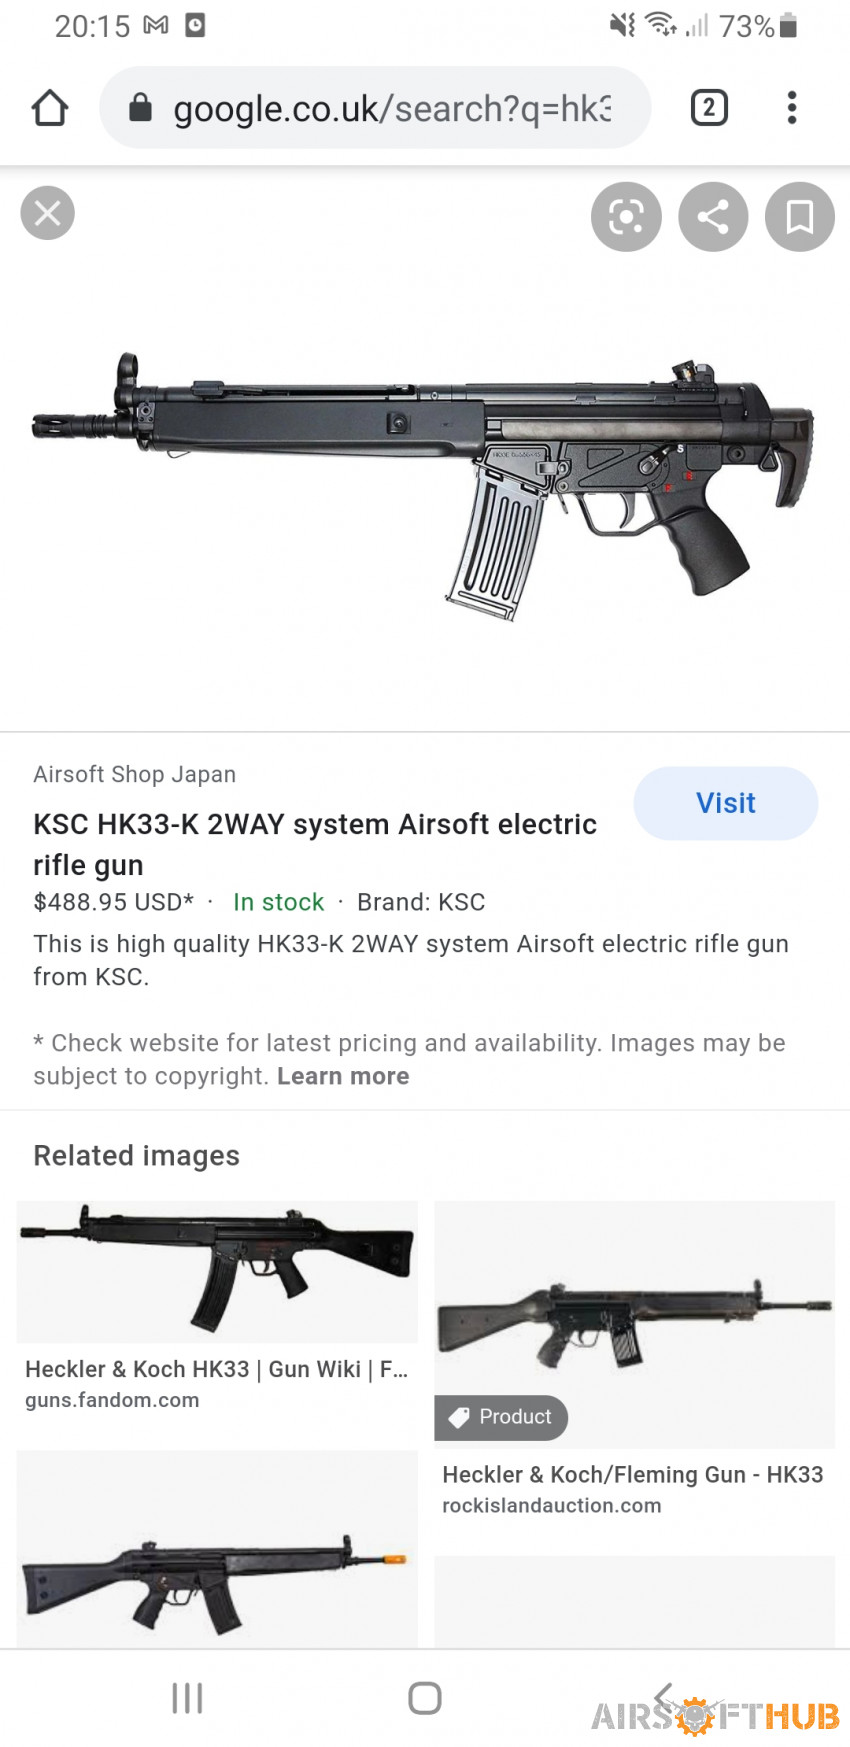 Wanted hk33 - Used airsoft equipment